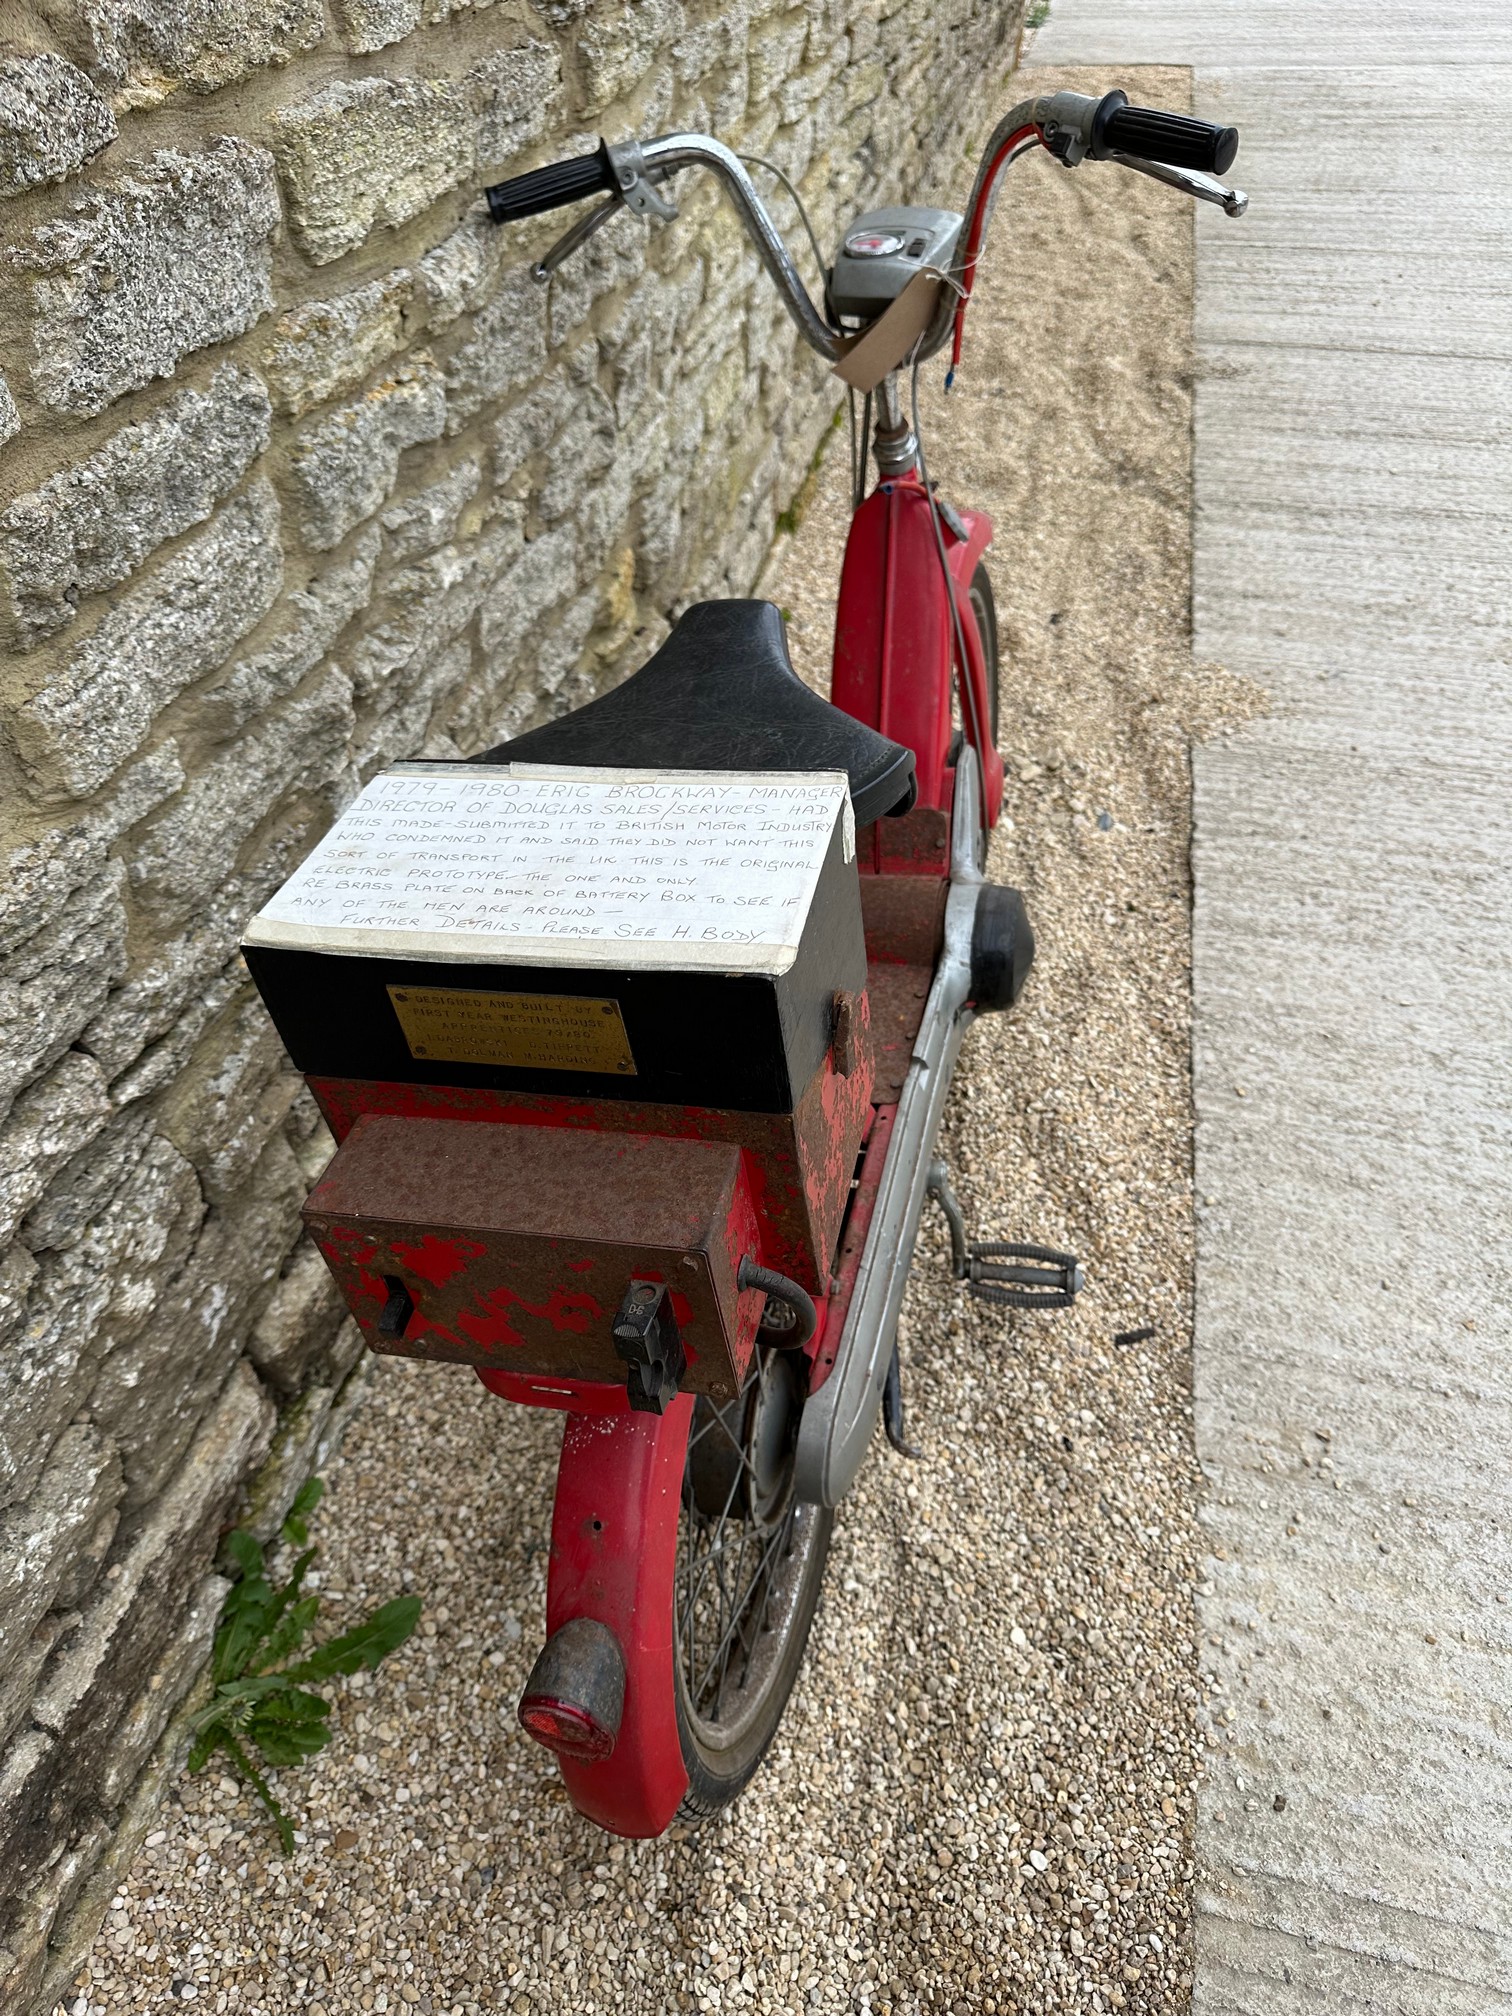 1980 DOUGLAS ELECTRIC MOPED - Image 4 of 5